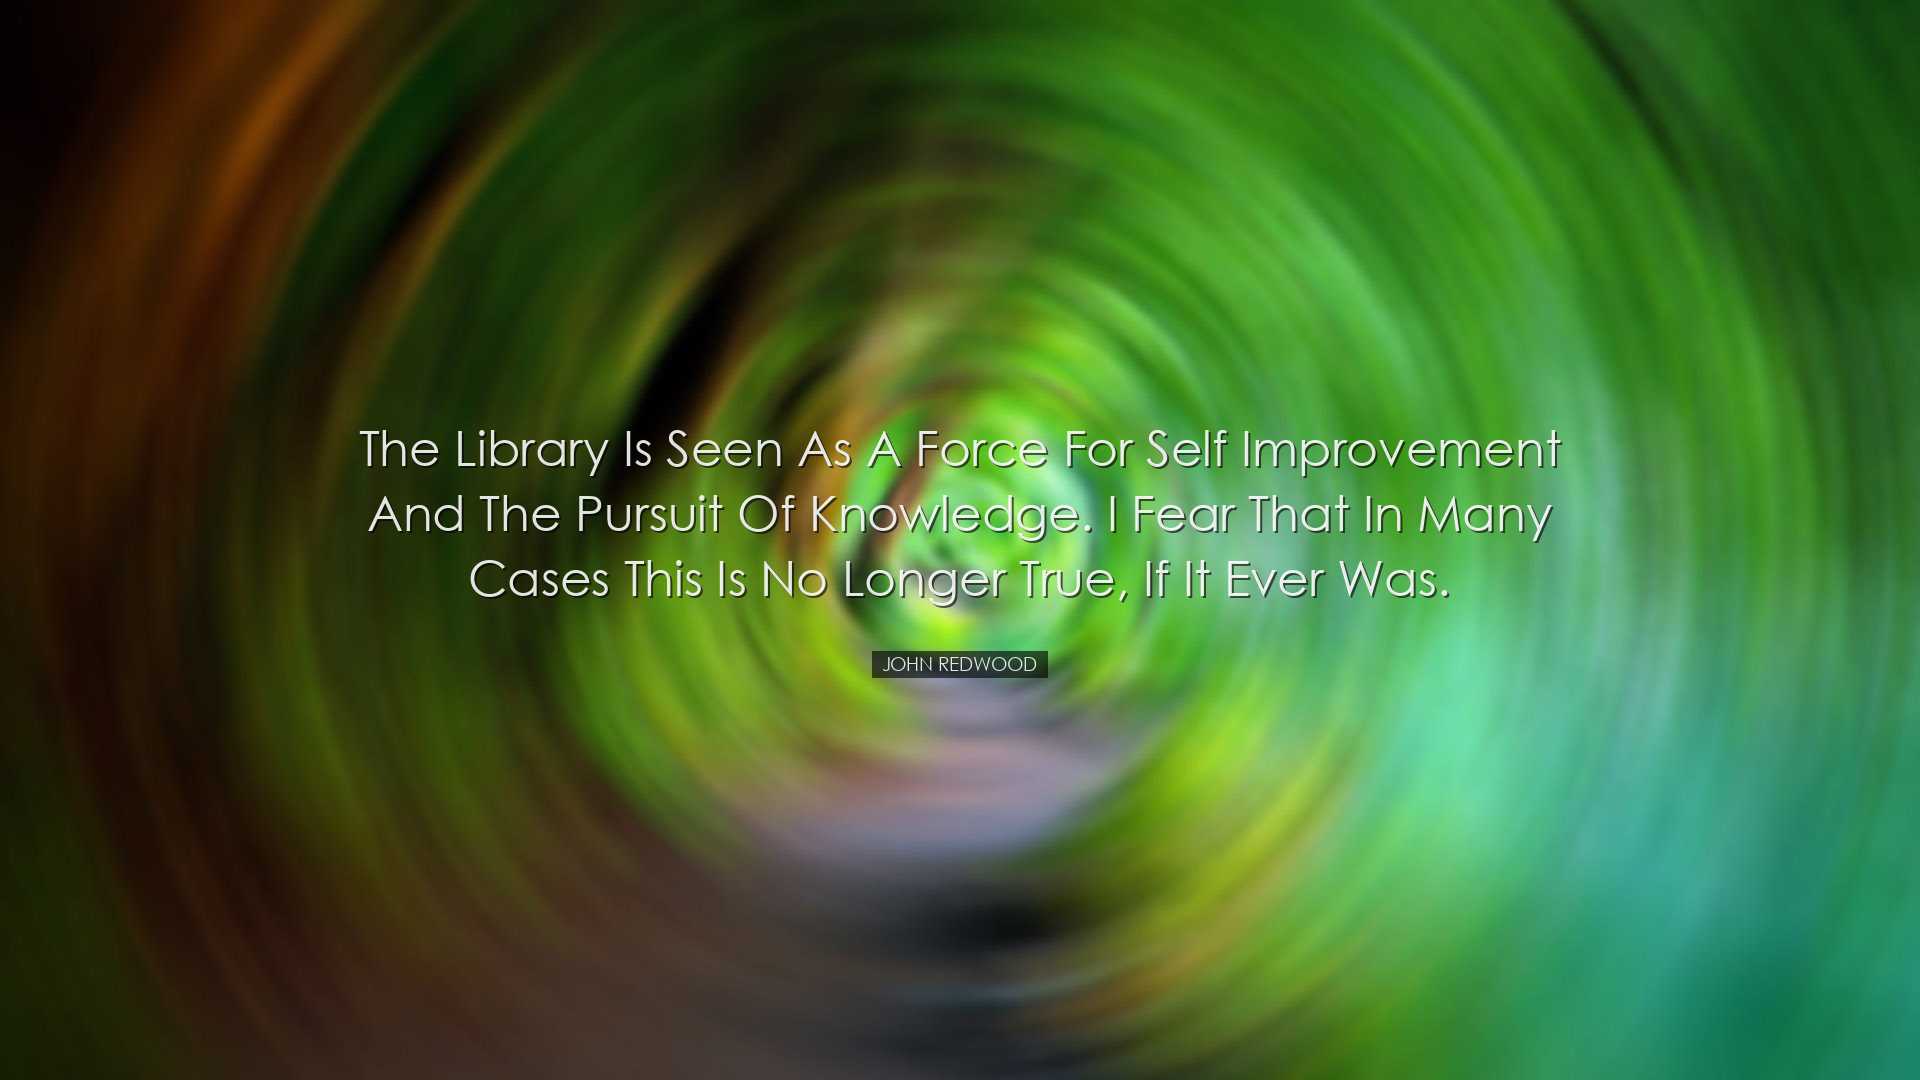 The library is seen as a force for self improvement and the pursui